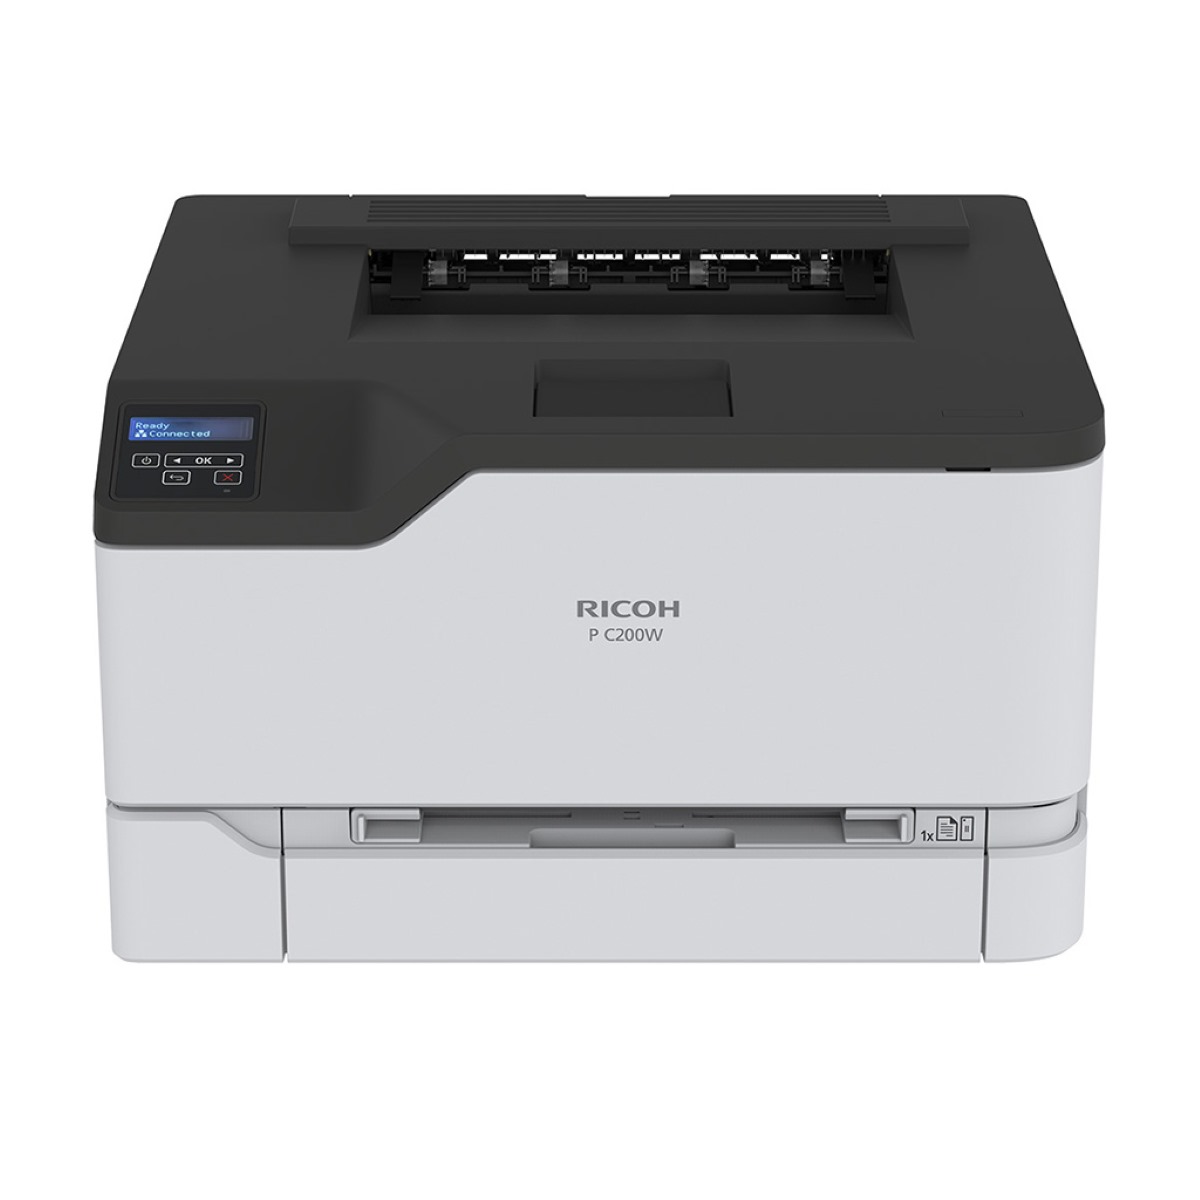 How To Connect Ricoh Printer To Wireless Network